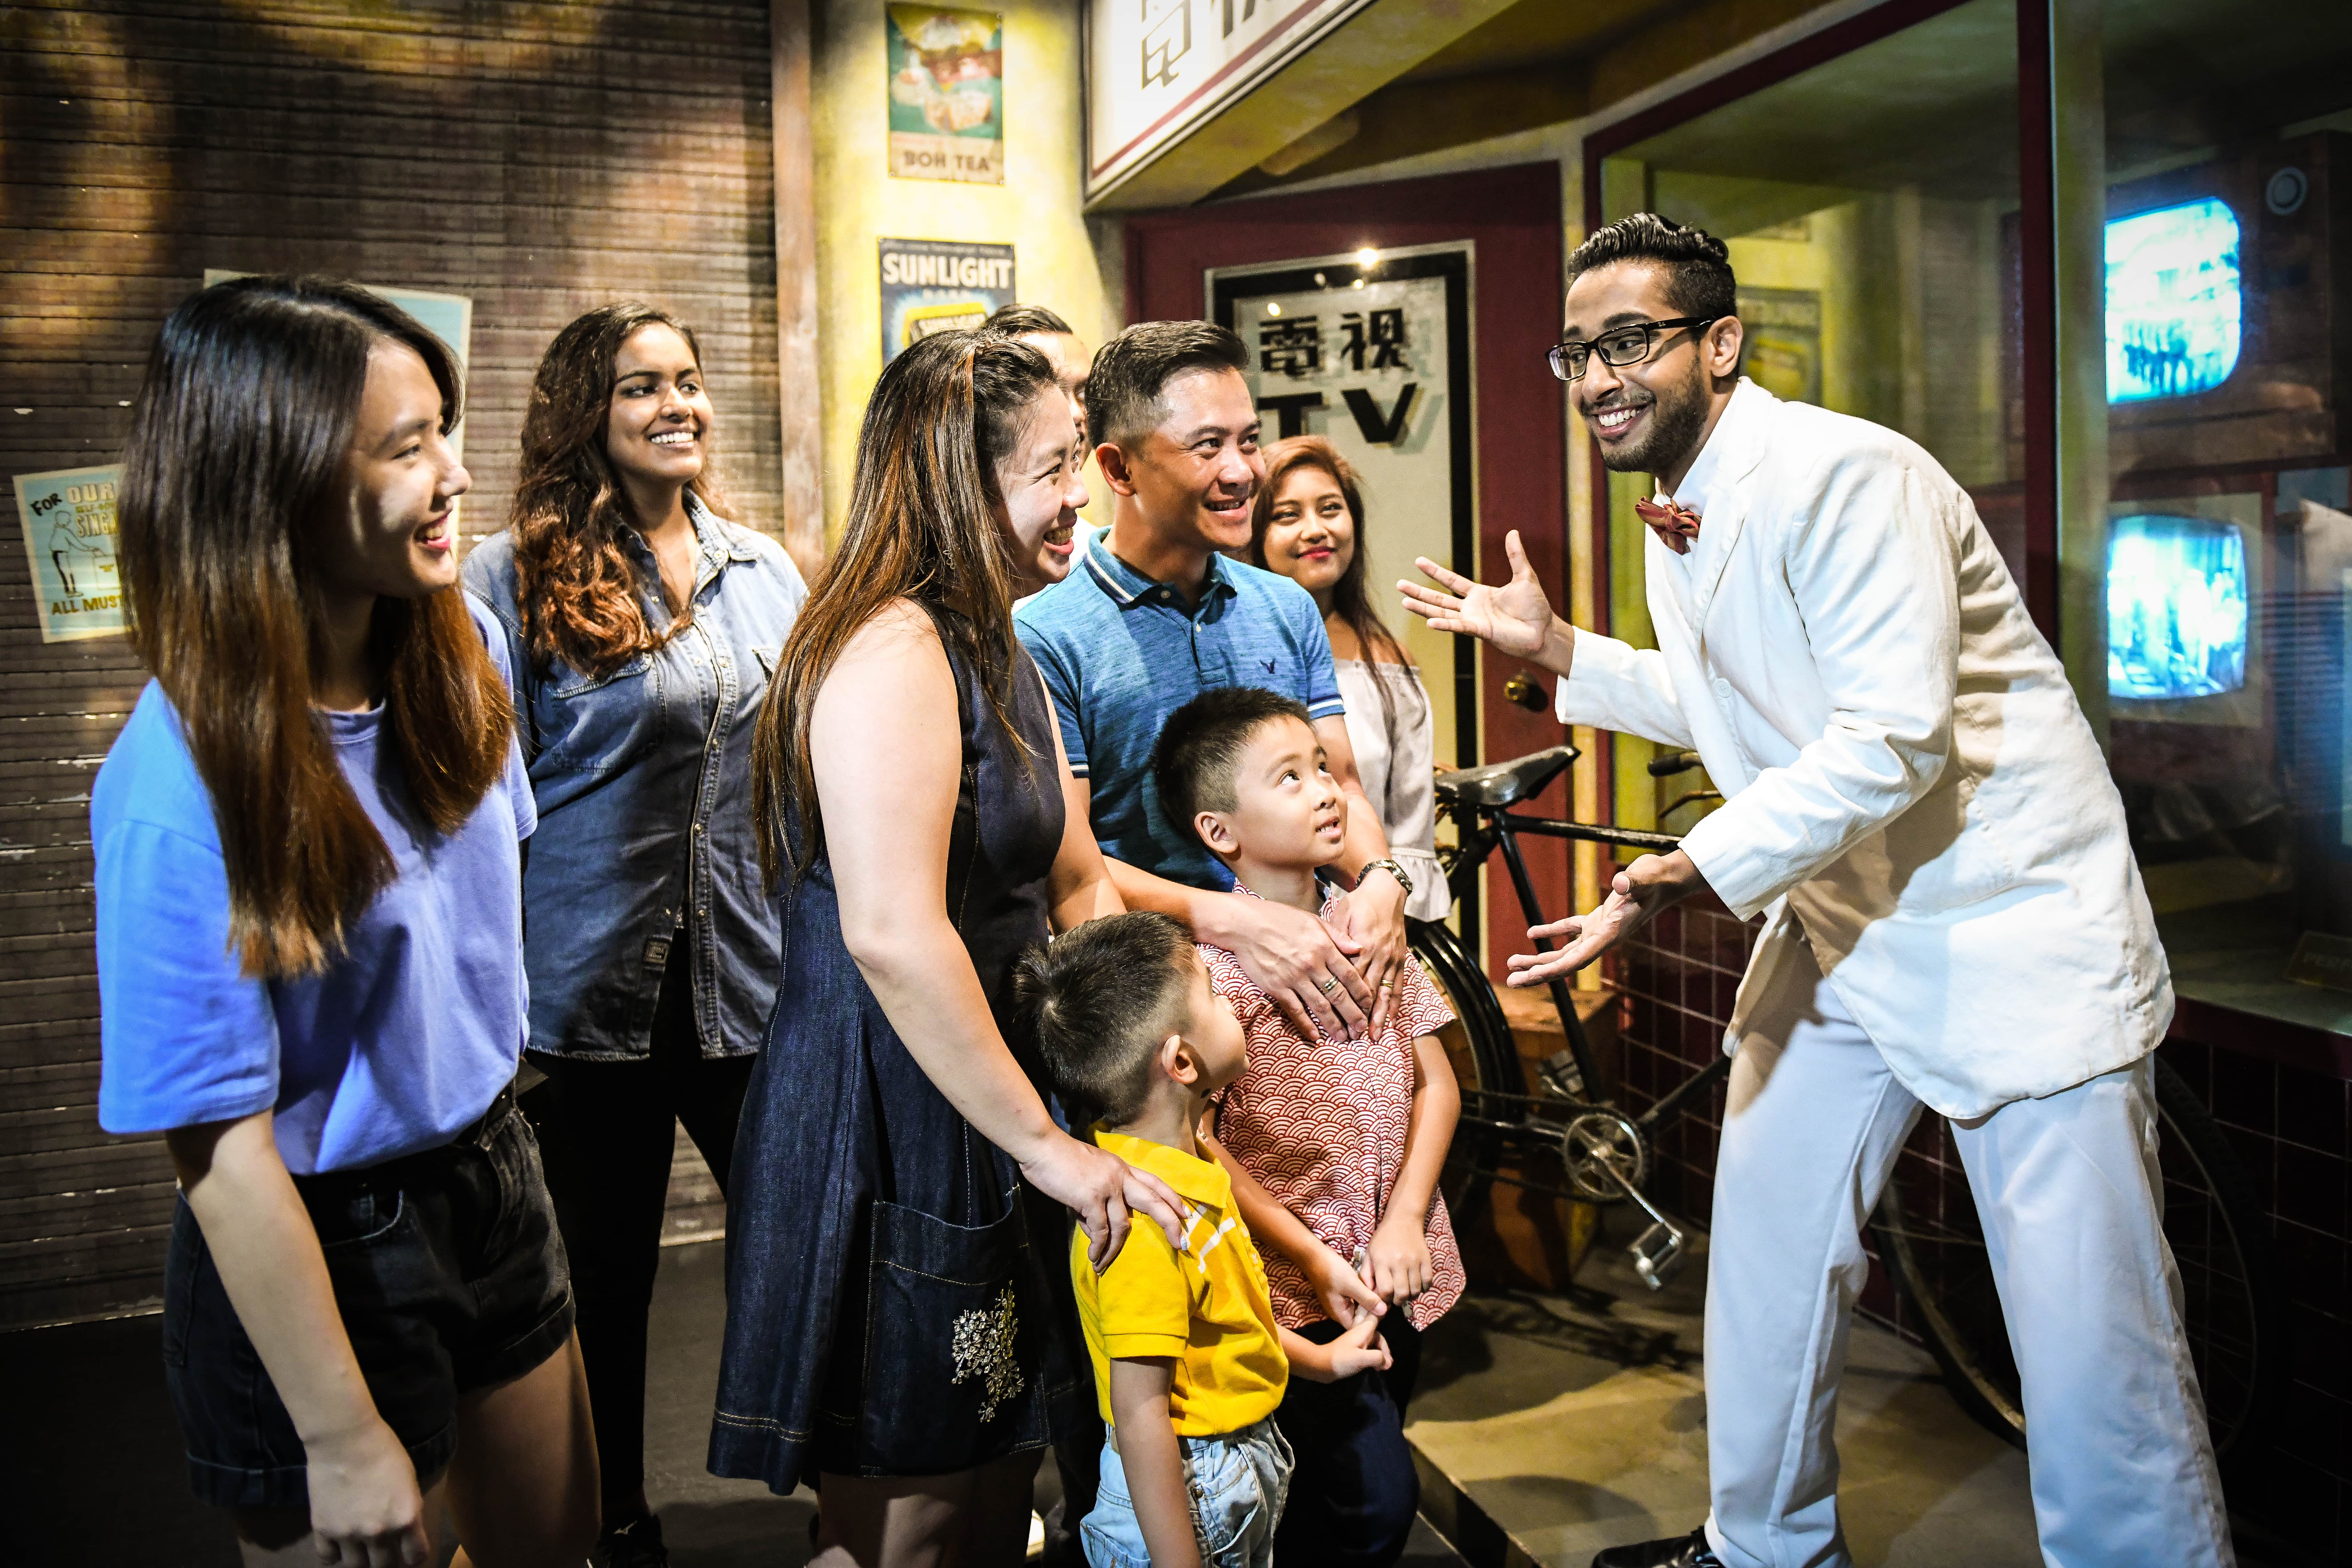 8 visitors including men, women and children in the exhibition of Images of Singapore, are beaming joyfully while looking at the wax figure salesman in a white suit outside the television shop smiling back at them with a welcoming gesture.